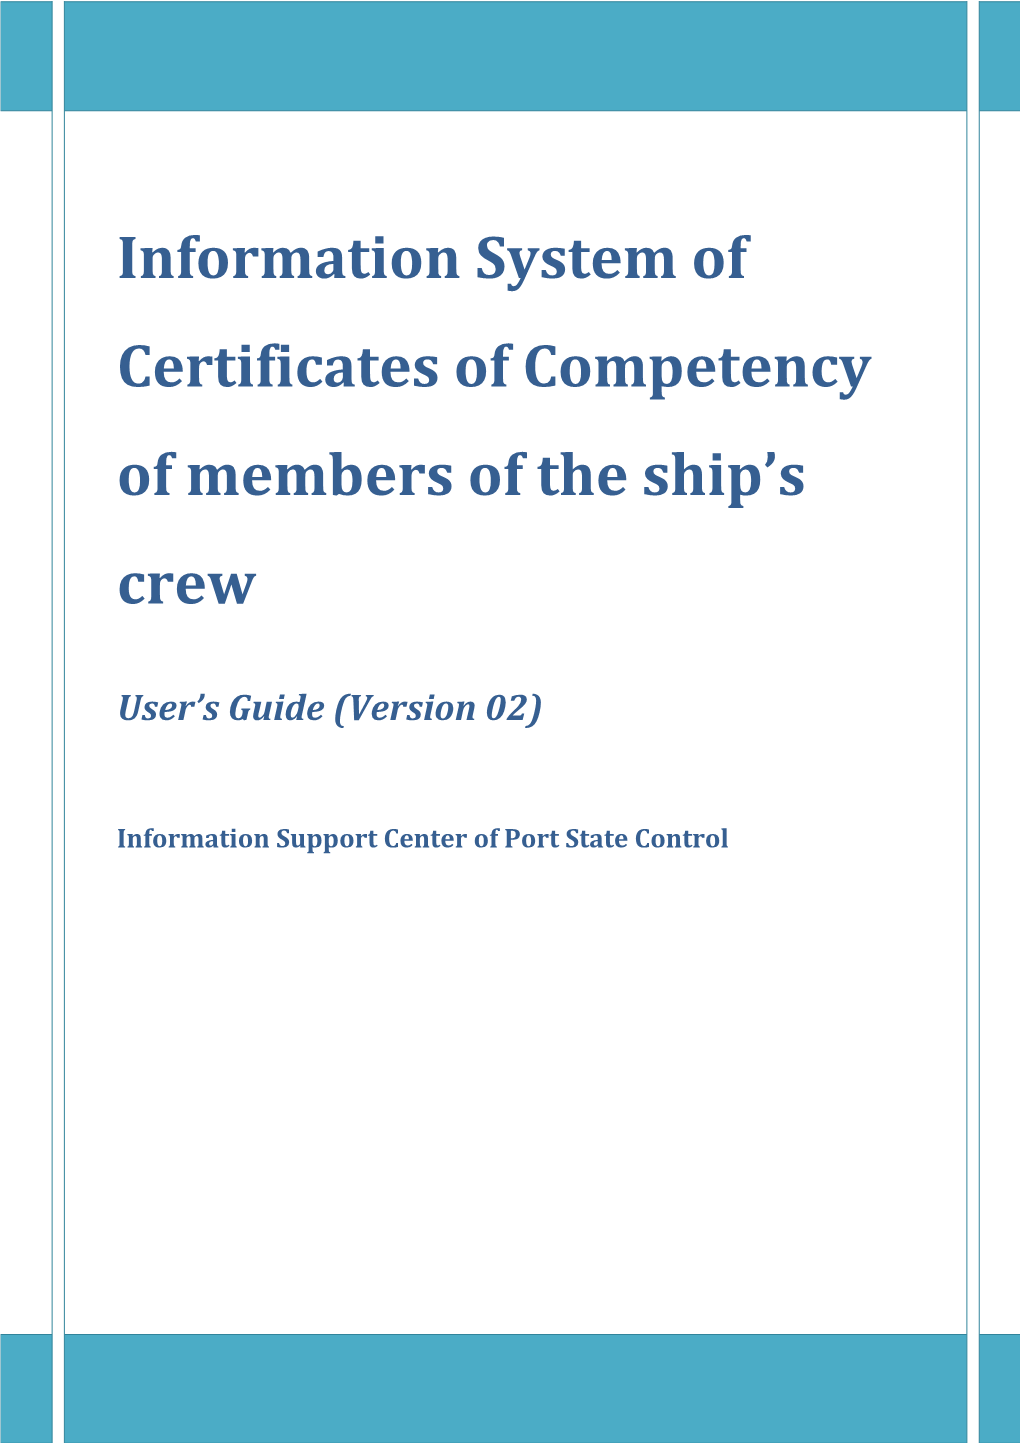 Information System of Certificates of Competency of Members of the Ship S Crew